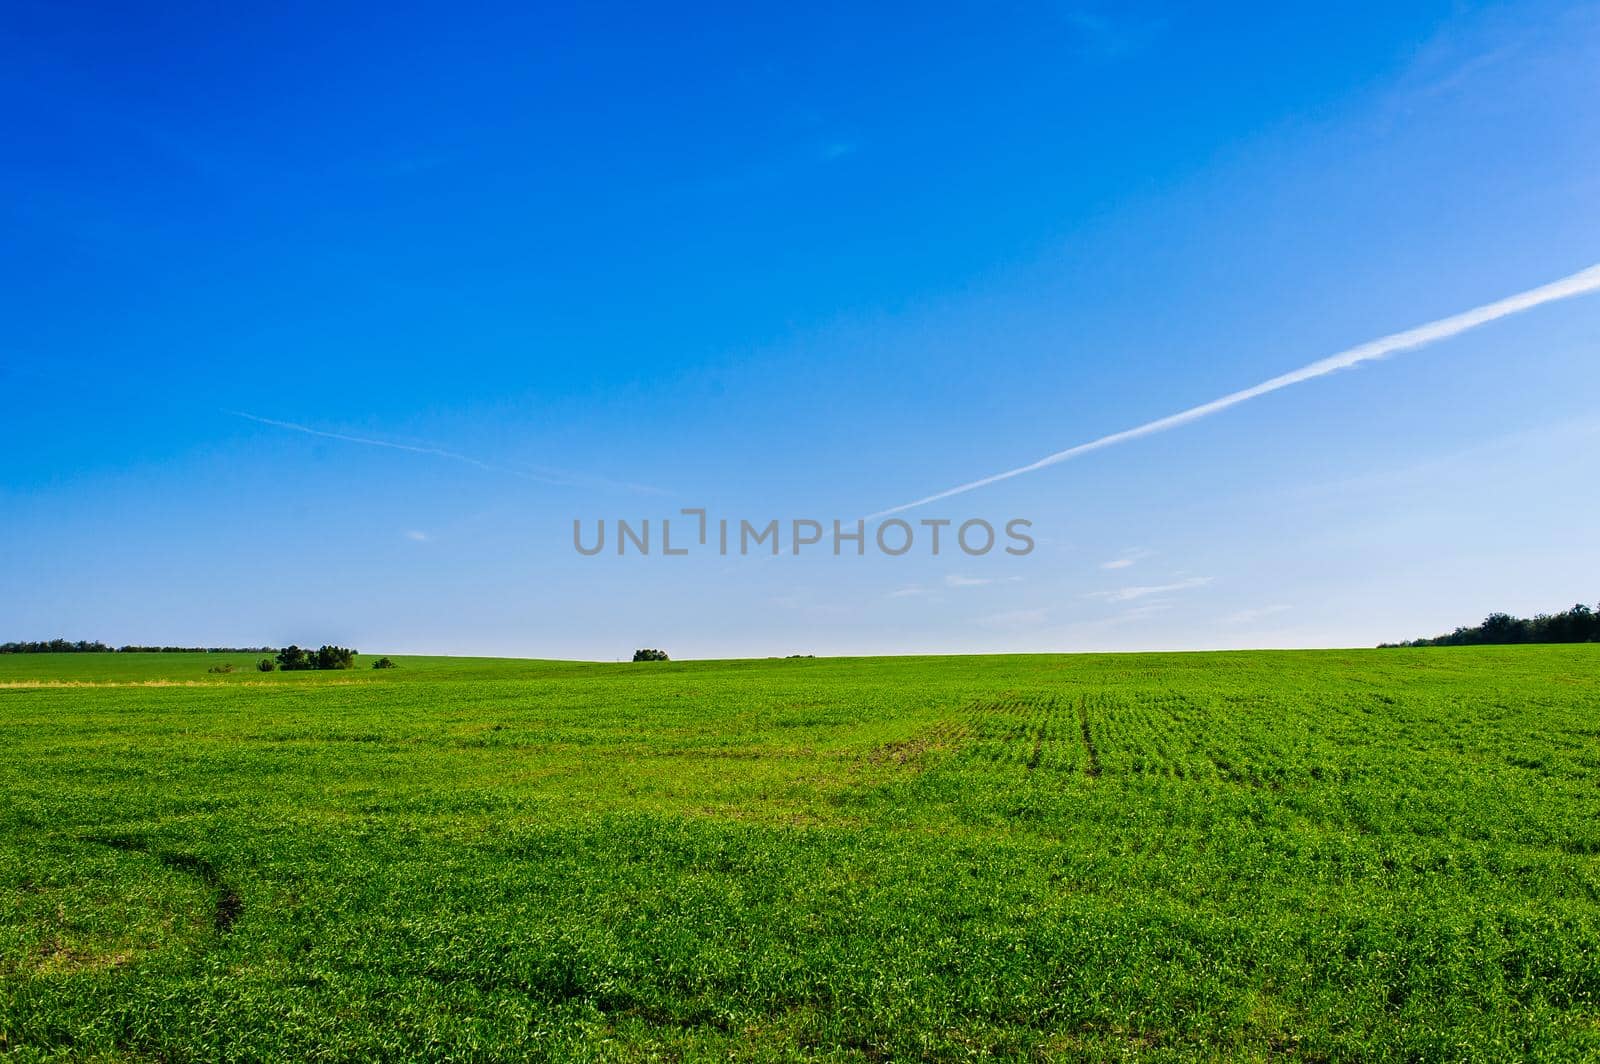 Green Field of wheat, blue sky and sun, white clouds. wonderland